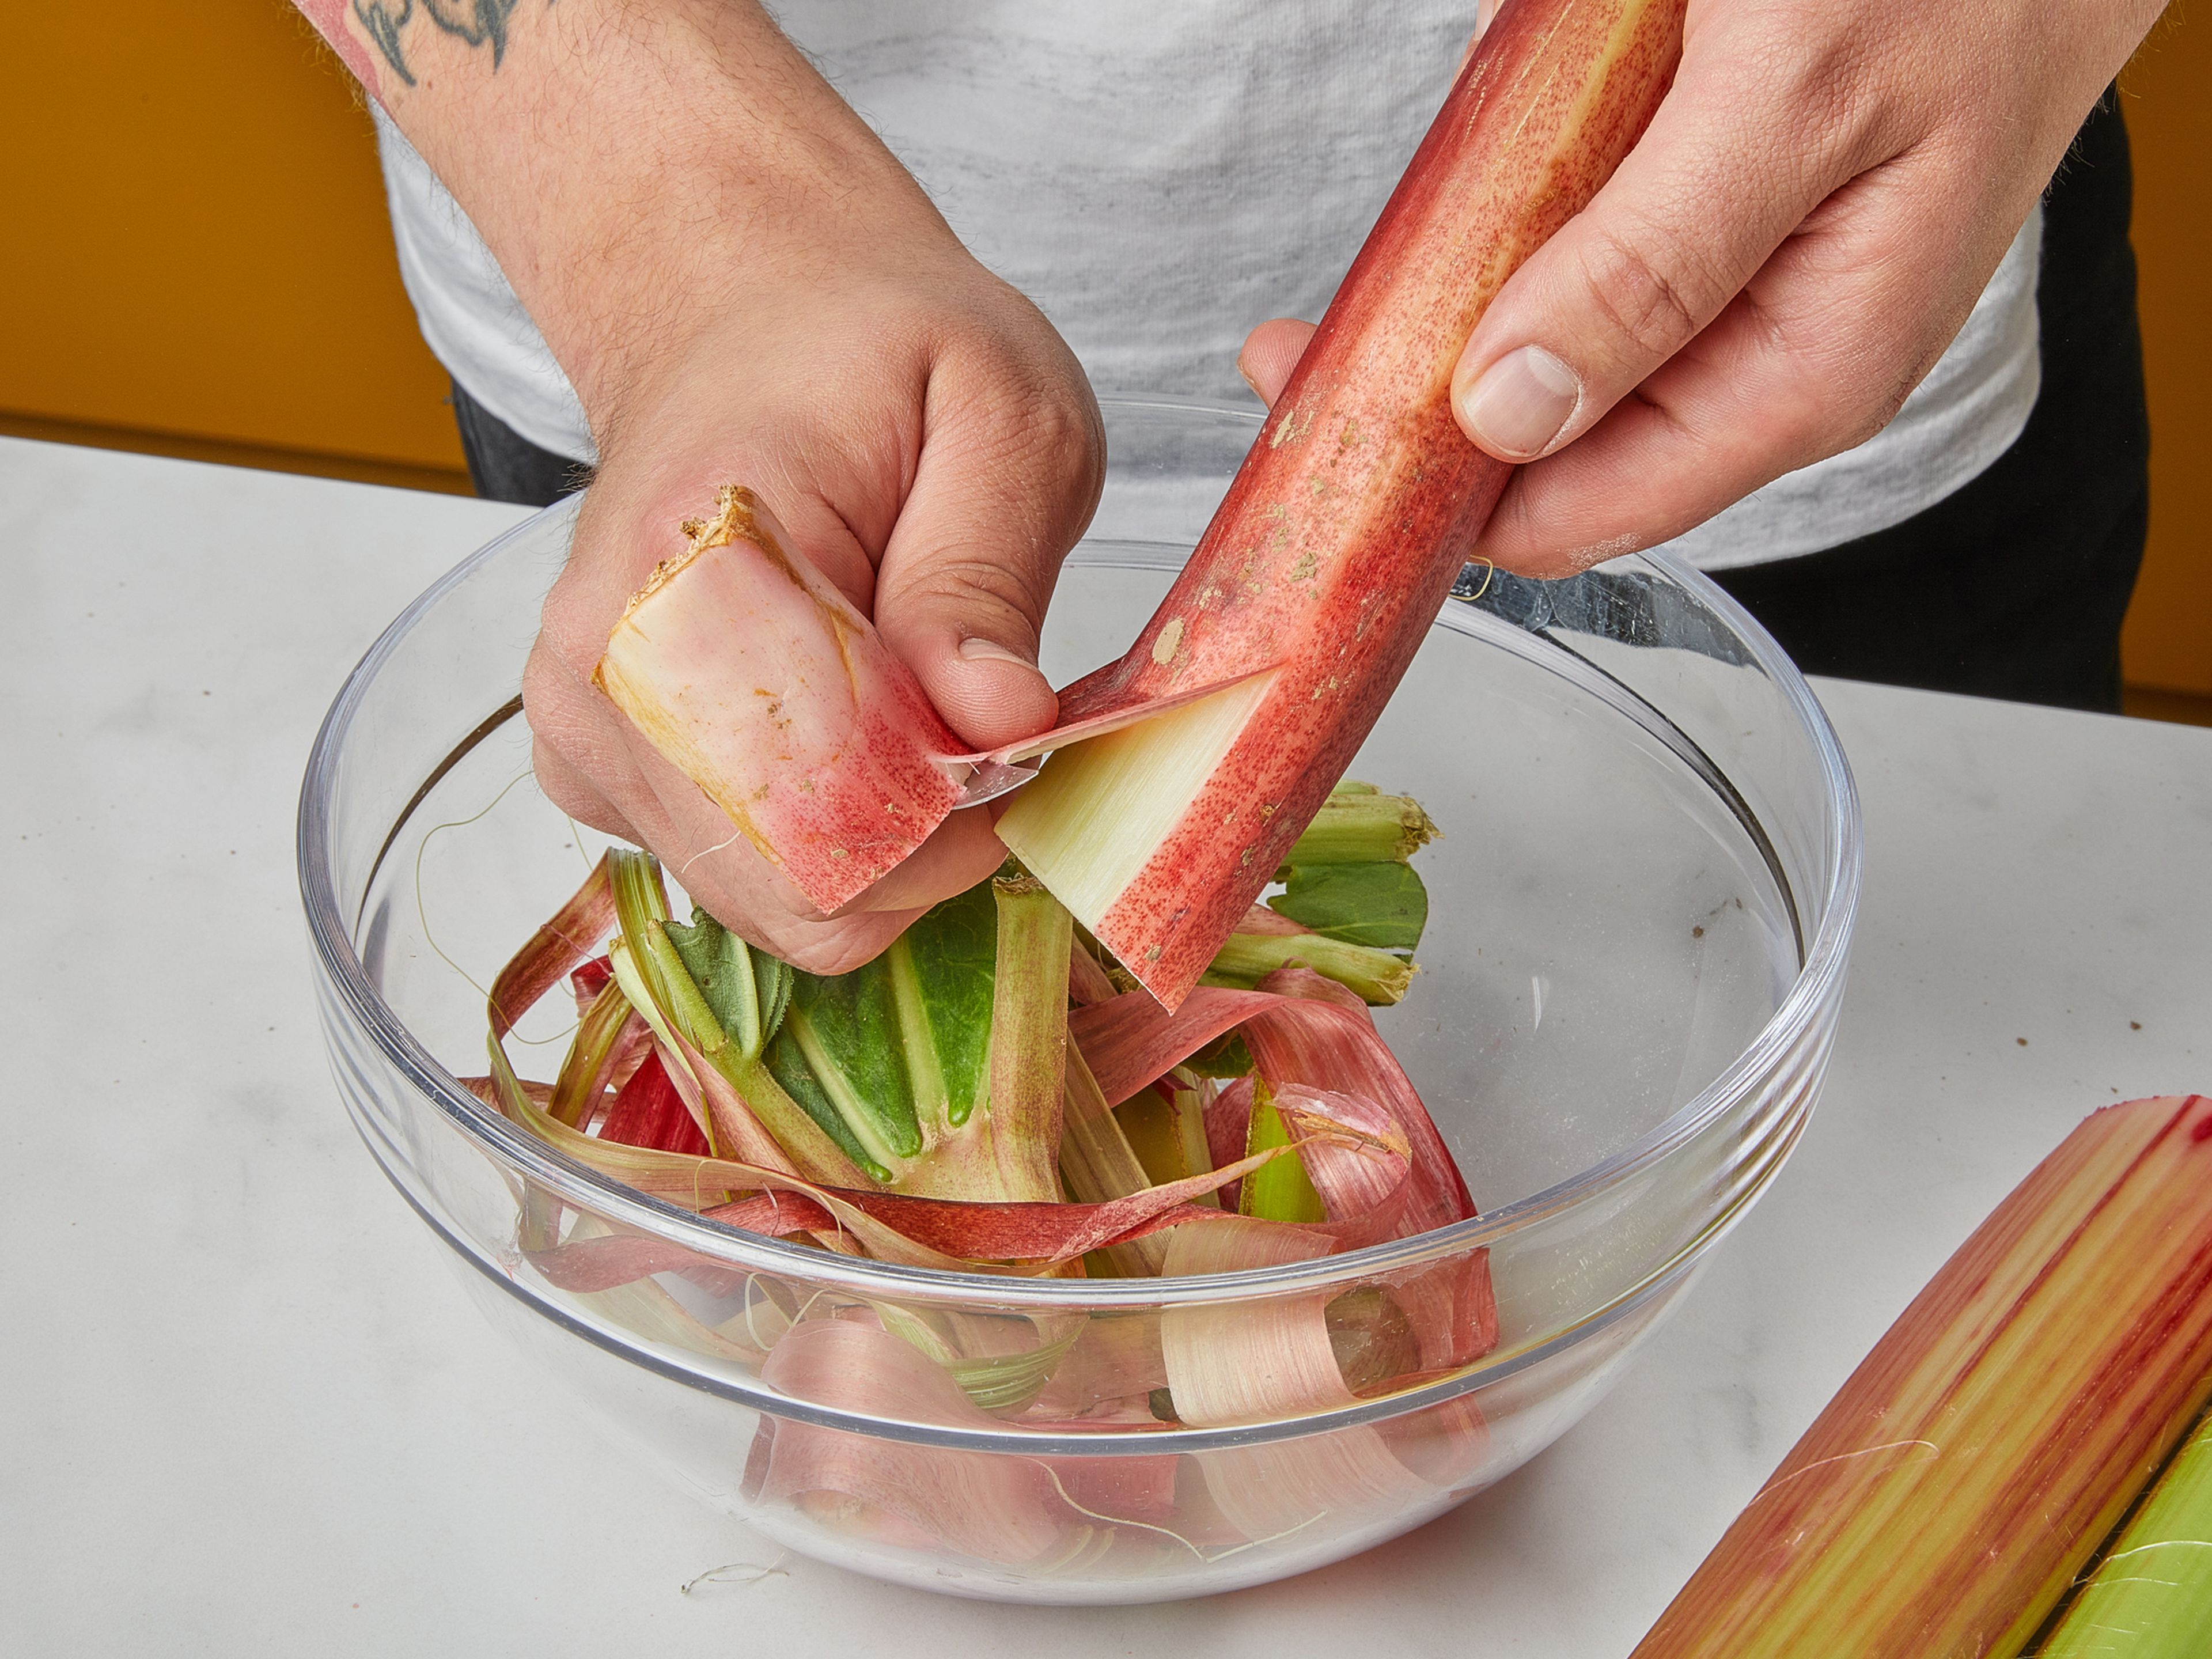 Place a small plate in the freezer. Clean the rhubarb and peel with a small knife, then cut the stalks into small pieces and transfer to a pot. Add jam sugar to the rhubarb and mix well. Let the mixture stand for approx.1 hr.